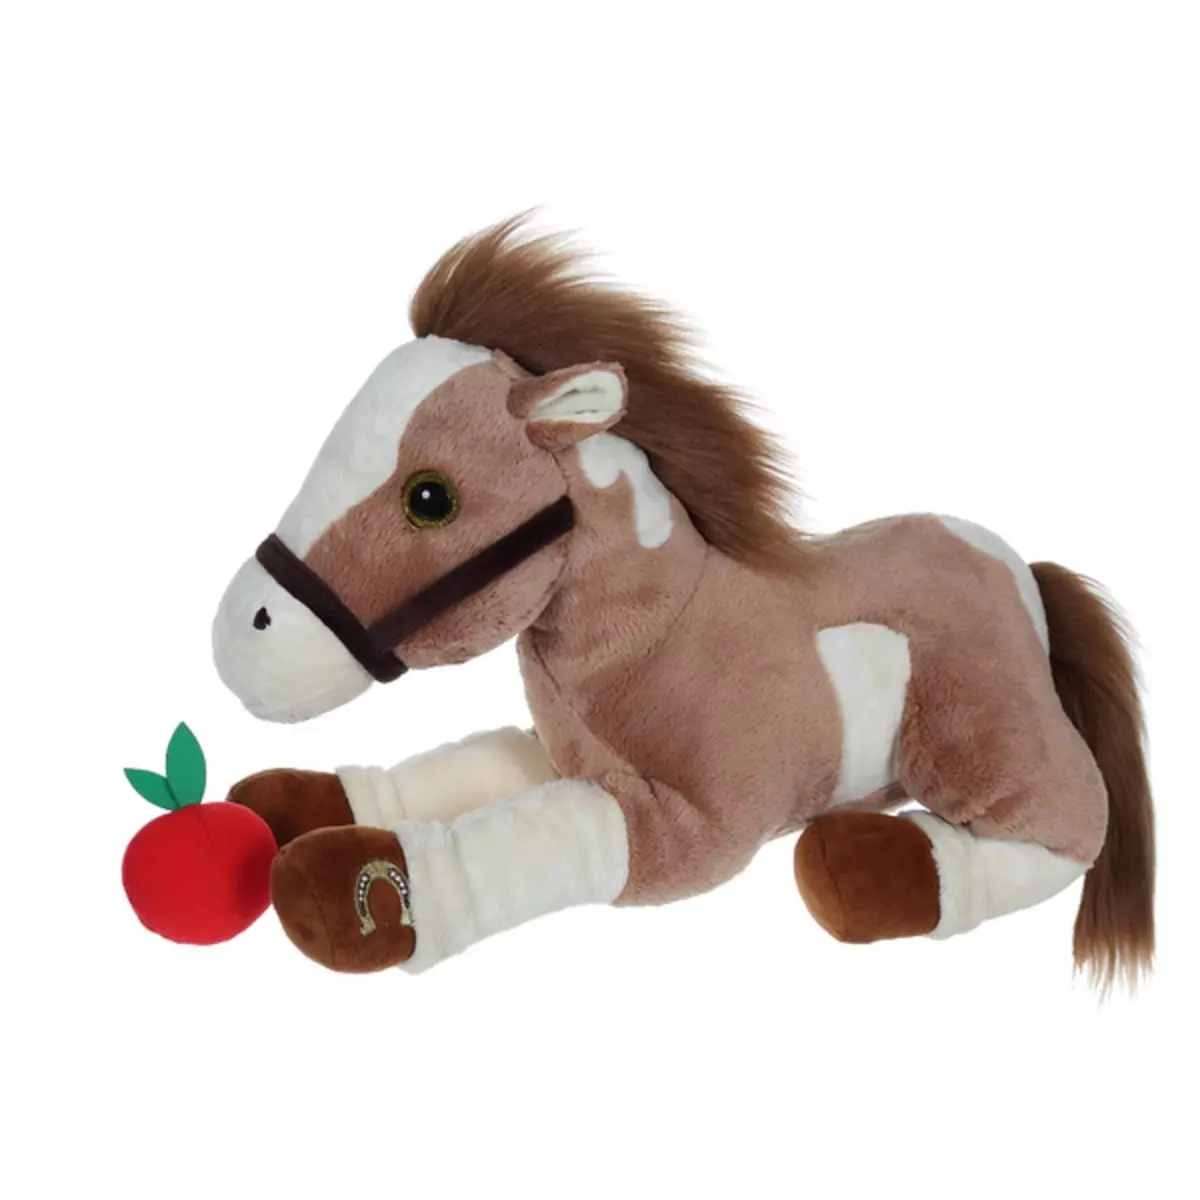 GIPSY Peluche interactive - Cheval sisco musical et lumineux 35 cm